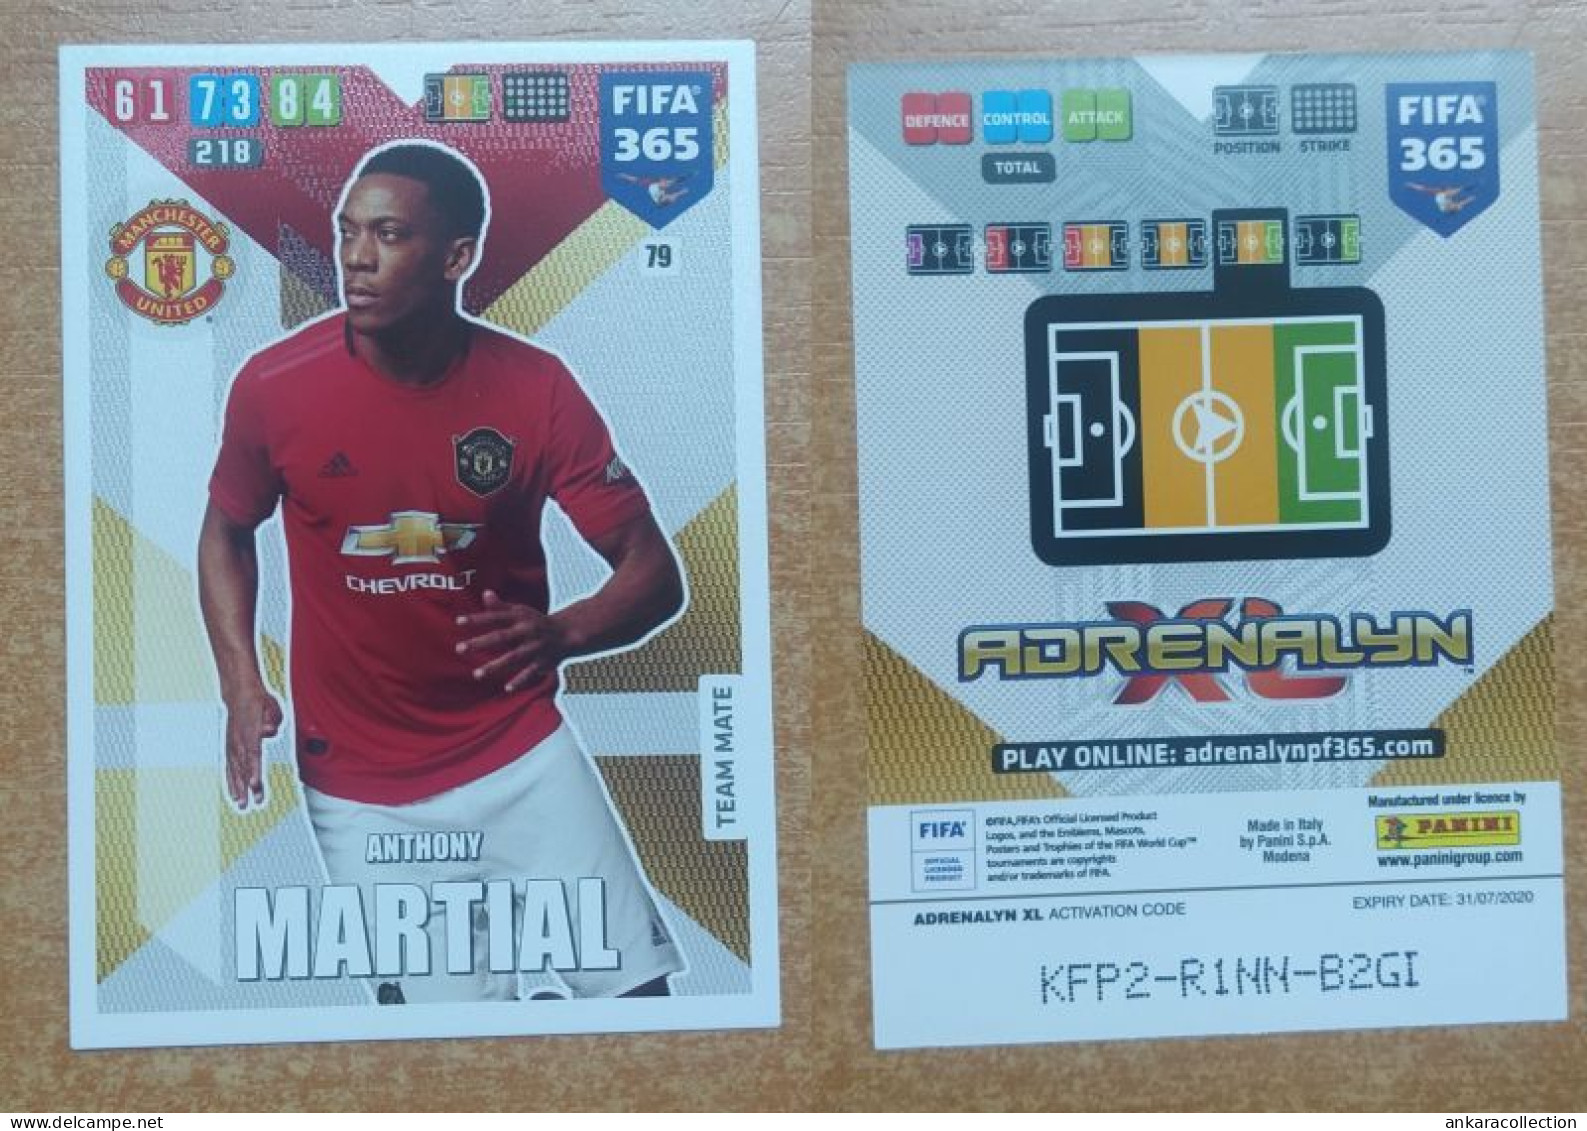 AC - 79 ANTHONY MARTIAL  MANCHESTER UNITED  PANINI FIFA 365 2020 ADRENALYN TRADING CARD - Tarjetas